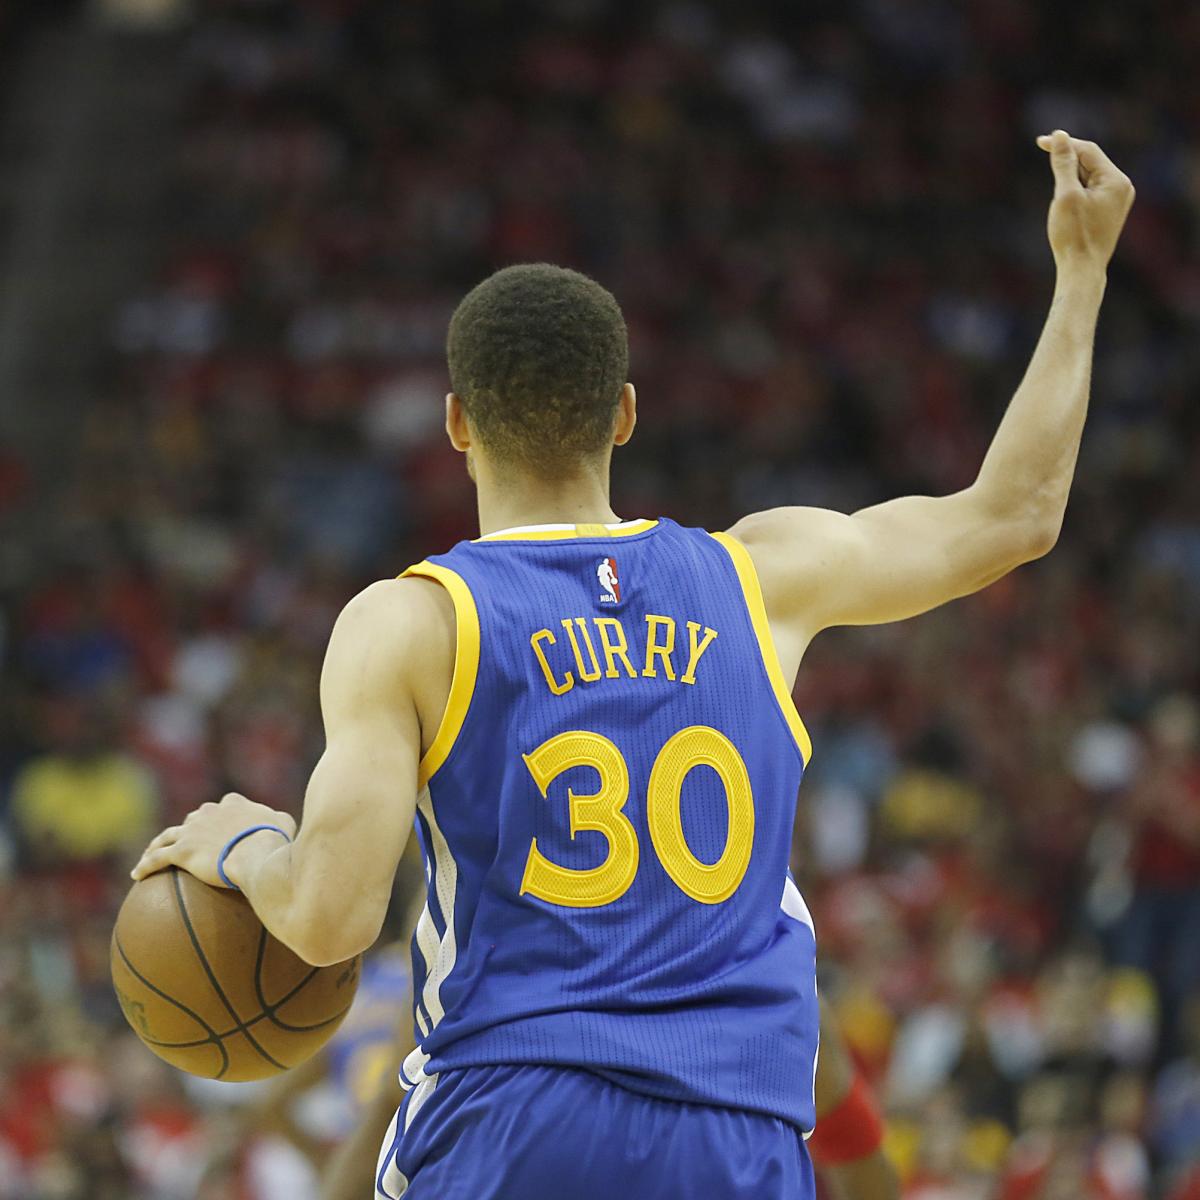 No. 30 is No. 1: Steph Curry Has Top-Selling Jersey, Beating